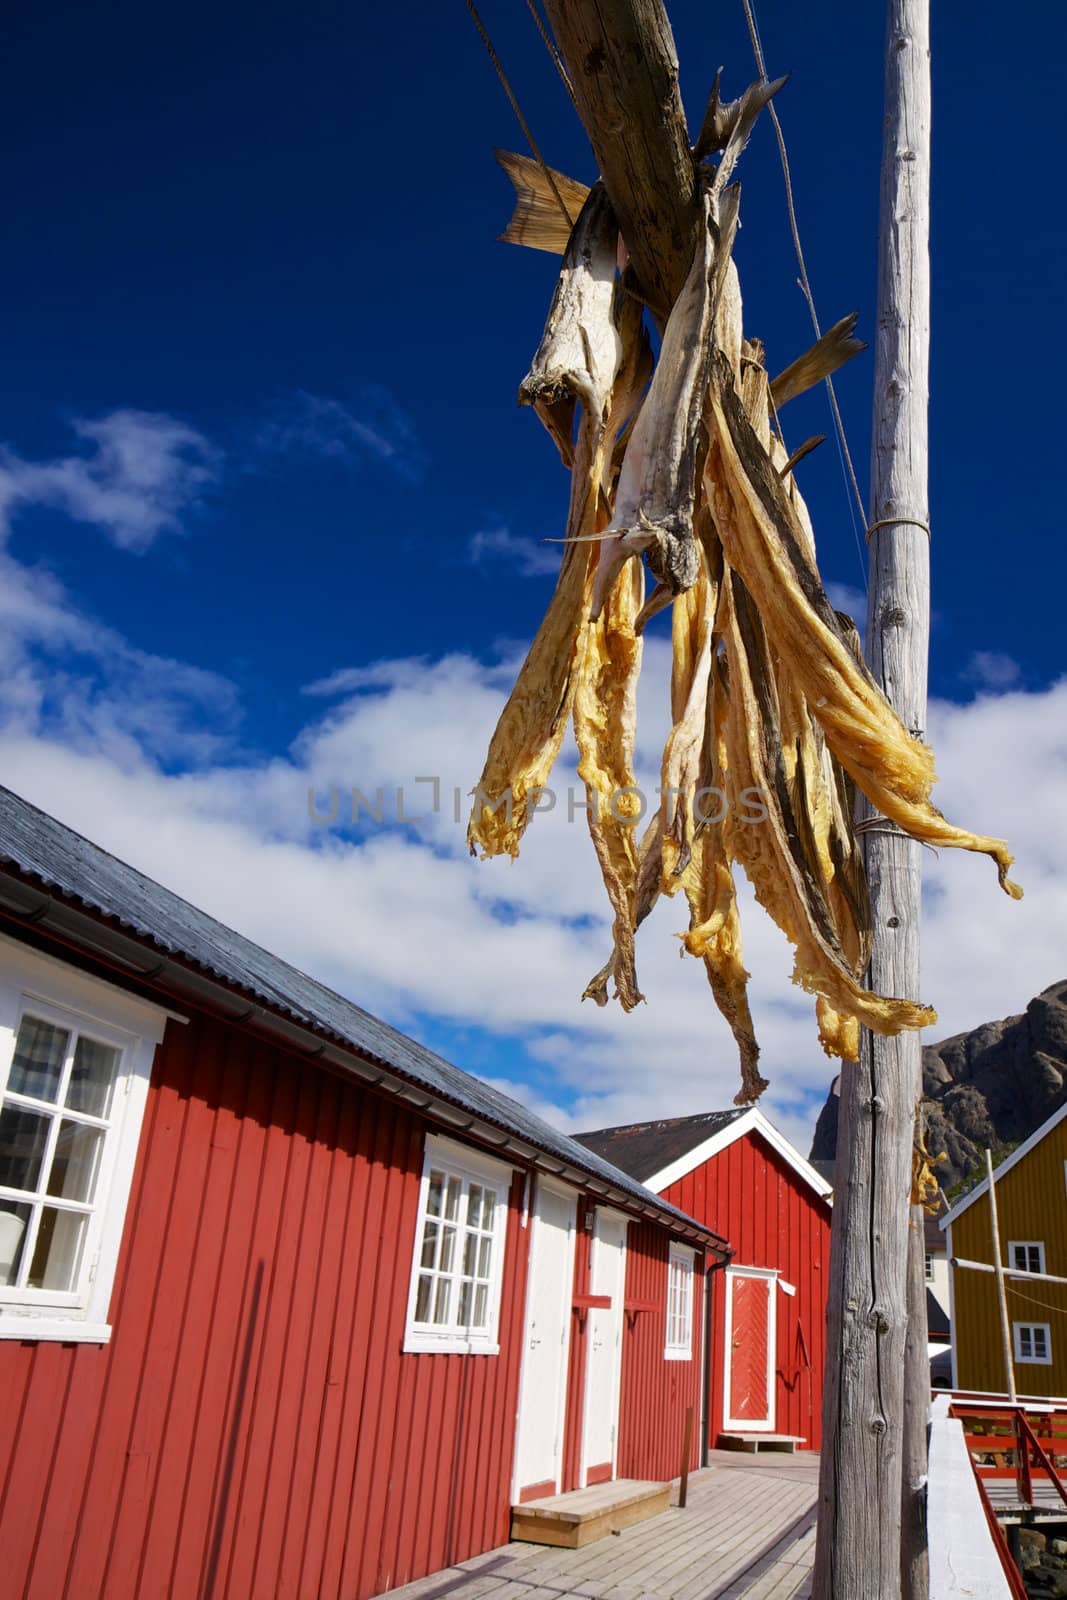 Traditional way of drying stock fish in fishing village Nusfjord on Lofoten islands, Norway